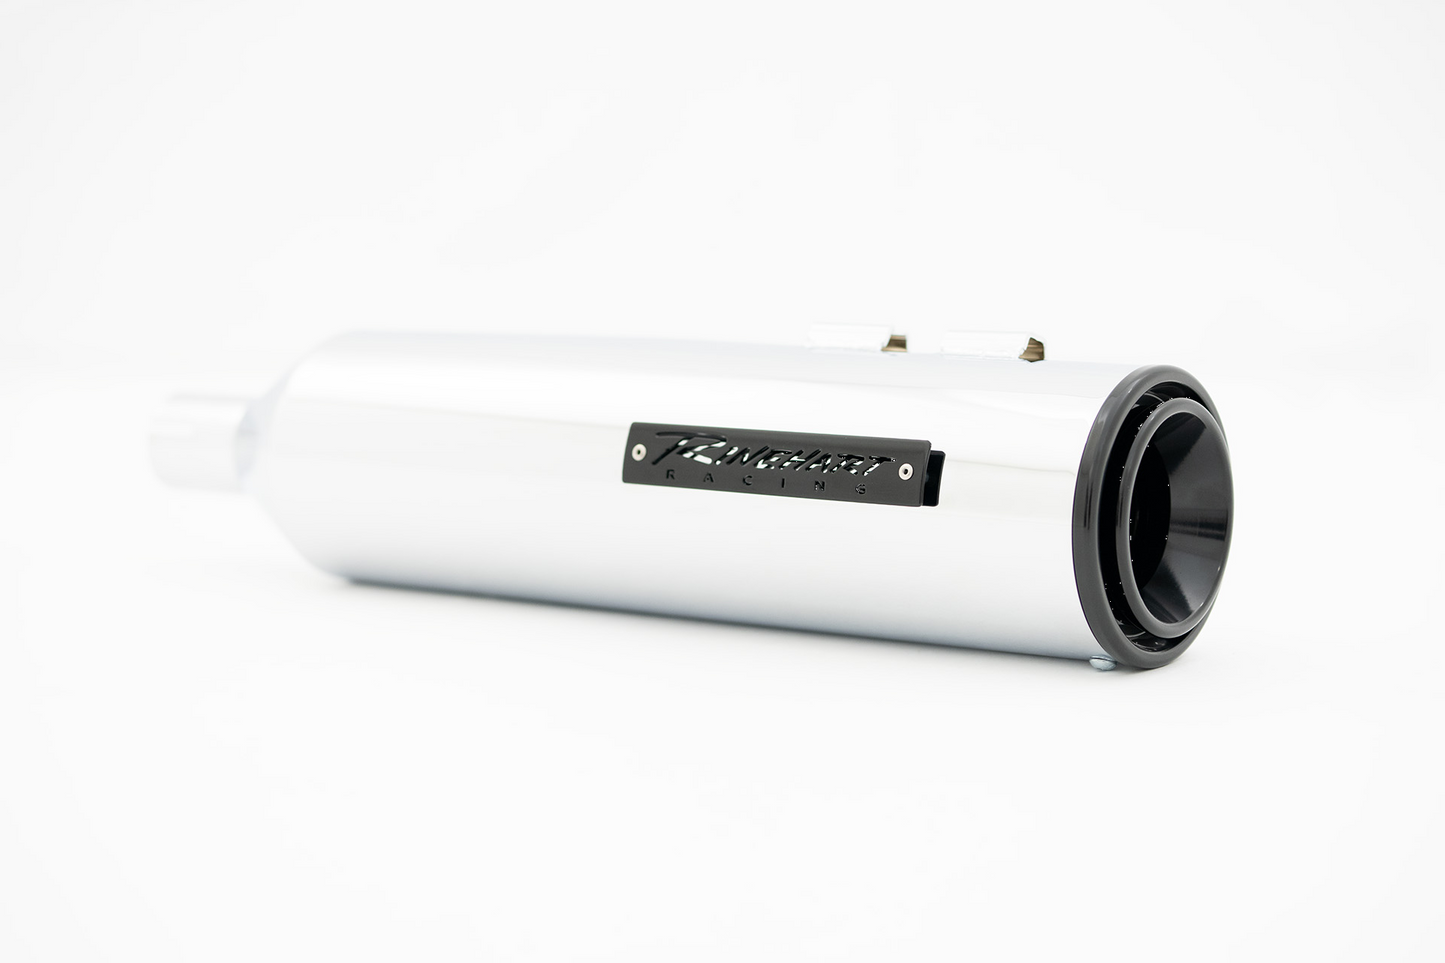 Slip-on HP45 silencers of 4.5 "Chrome with black tapas for HD